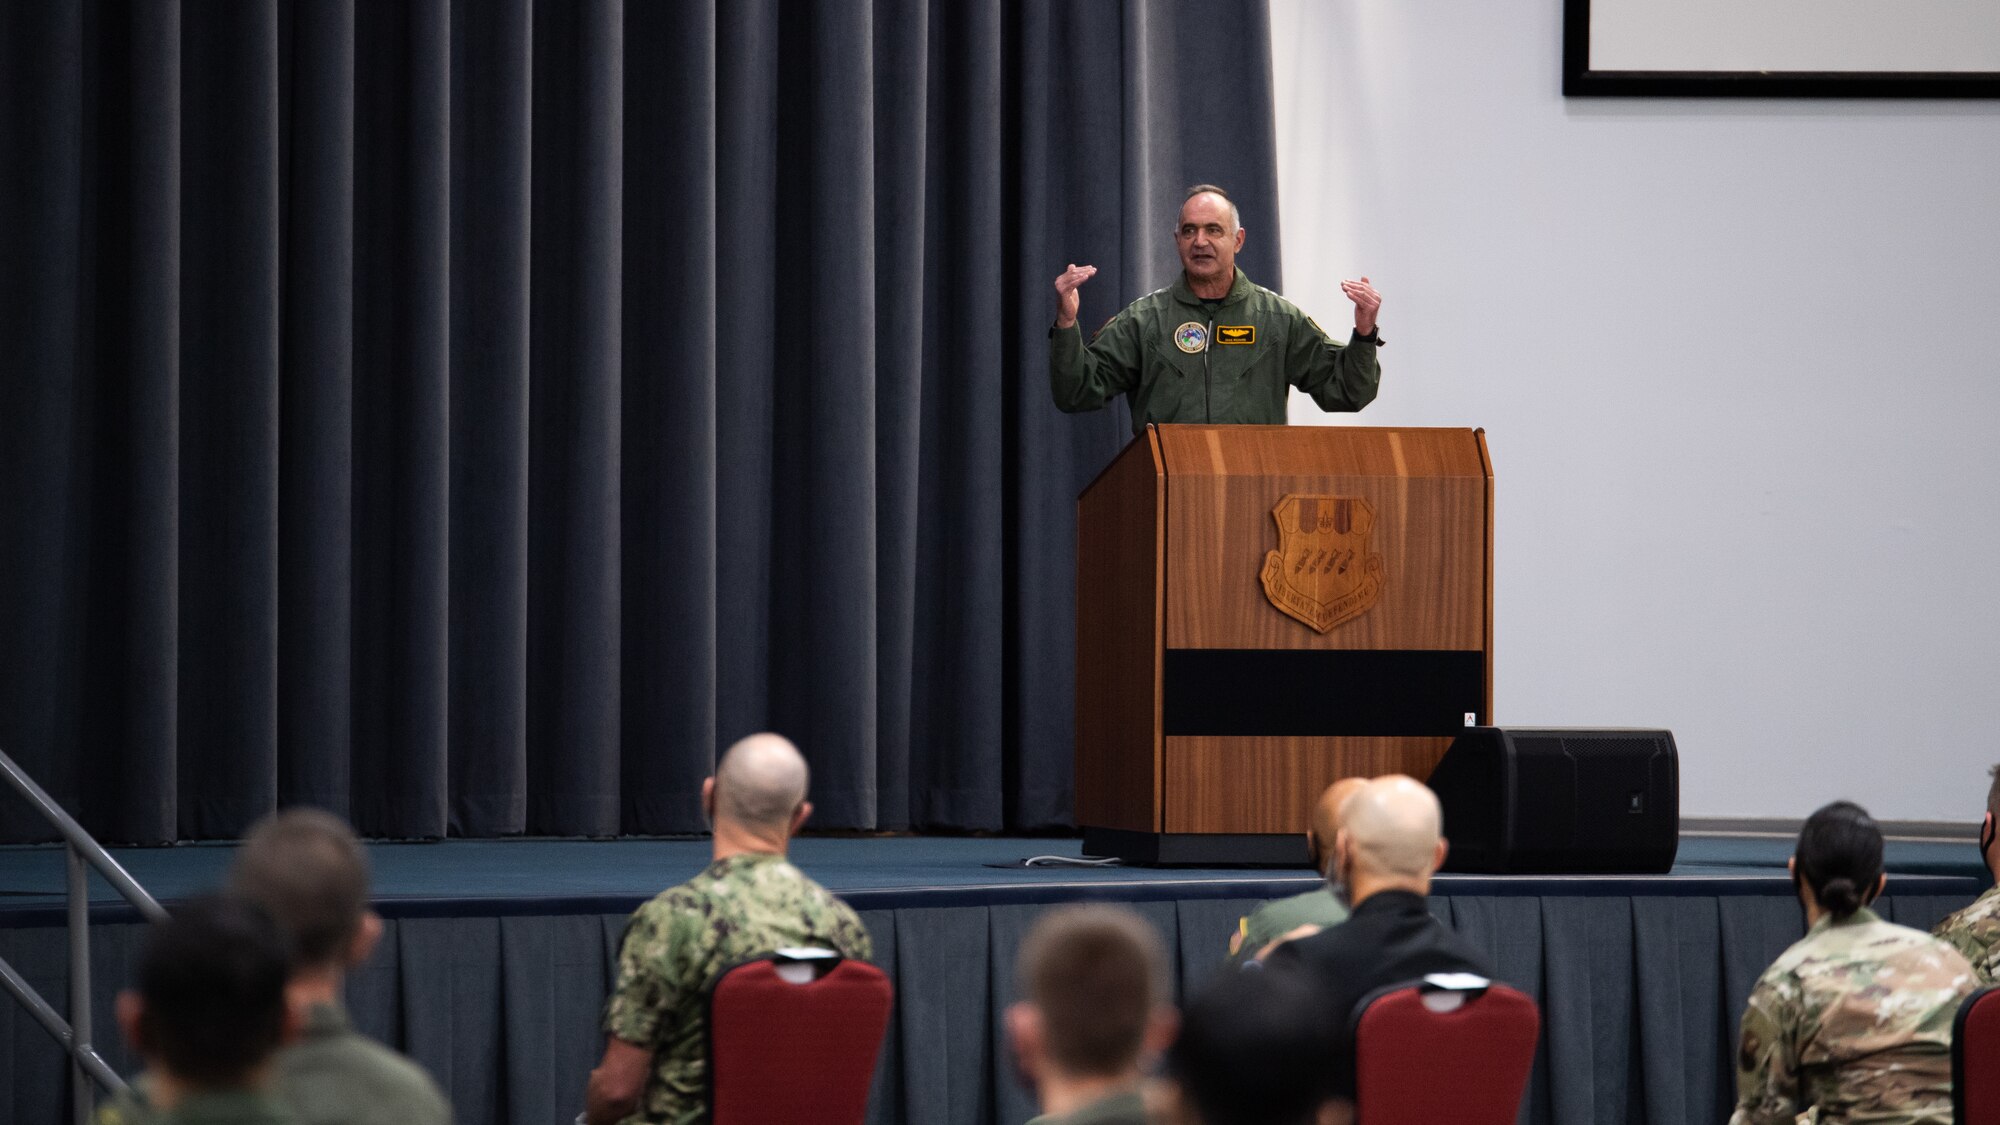 Adm. Charles Richard, U.S. Strategic Command commander, addresses the crowd during the presentation of the Omaha Trophy to the 96th Bomb Squadron at Barksdale Air Force Base, Louisiana, March 30, 2021. The Omaha Trophy is awarded each year to various units in recognition of outstanding support to USSTRATCOM's strategic deterrence mission. (U.S. Air Force photo by Airman 1st Class Jacob B. Wrightsman)